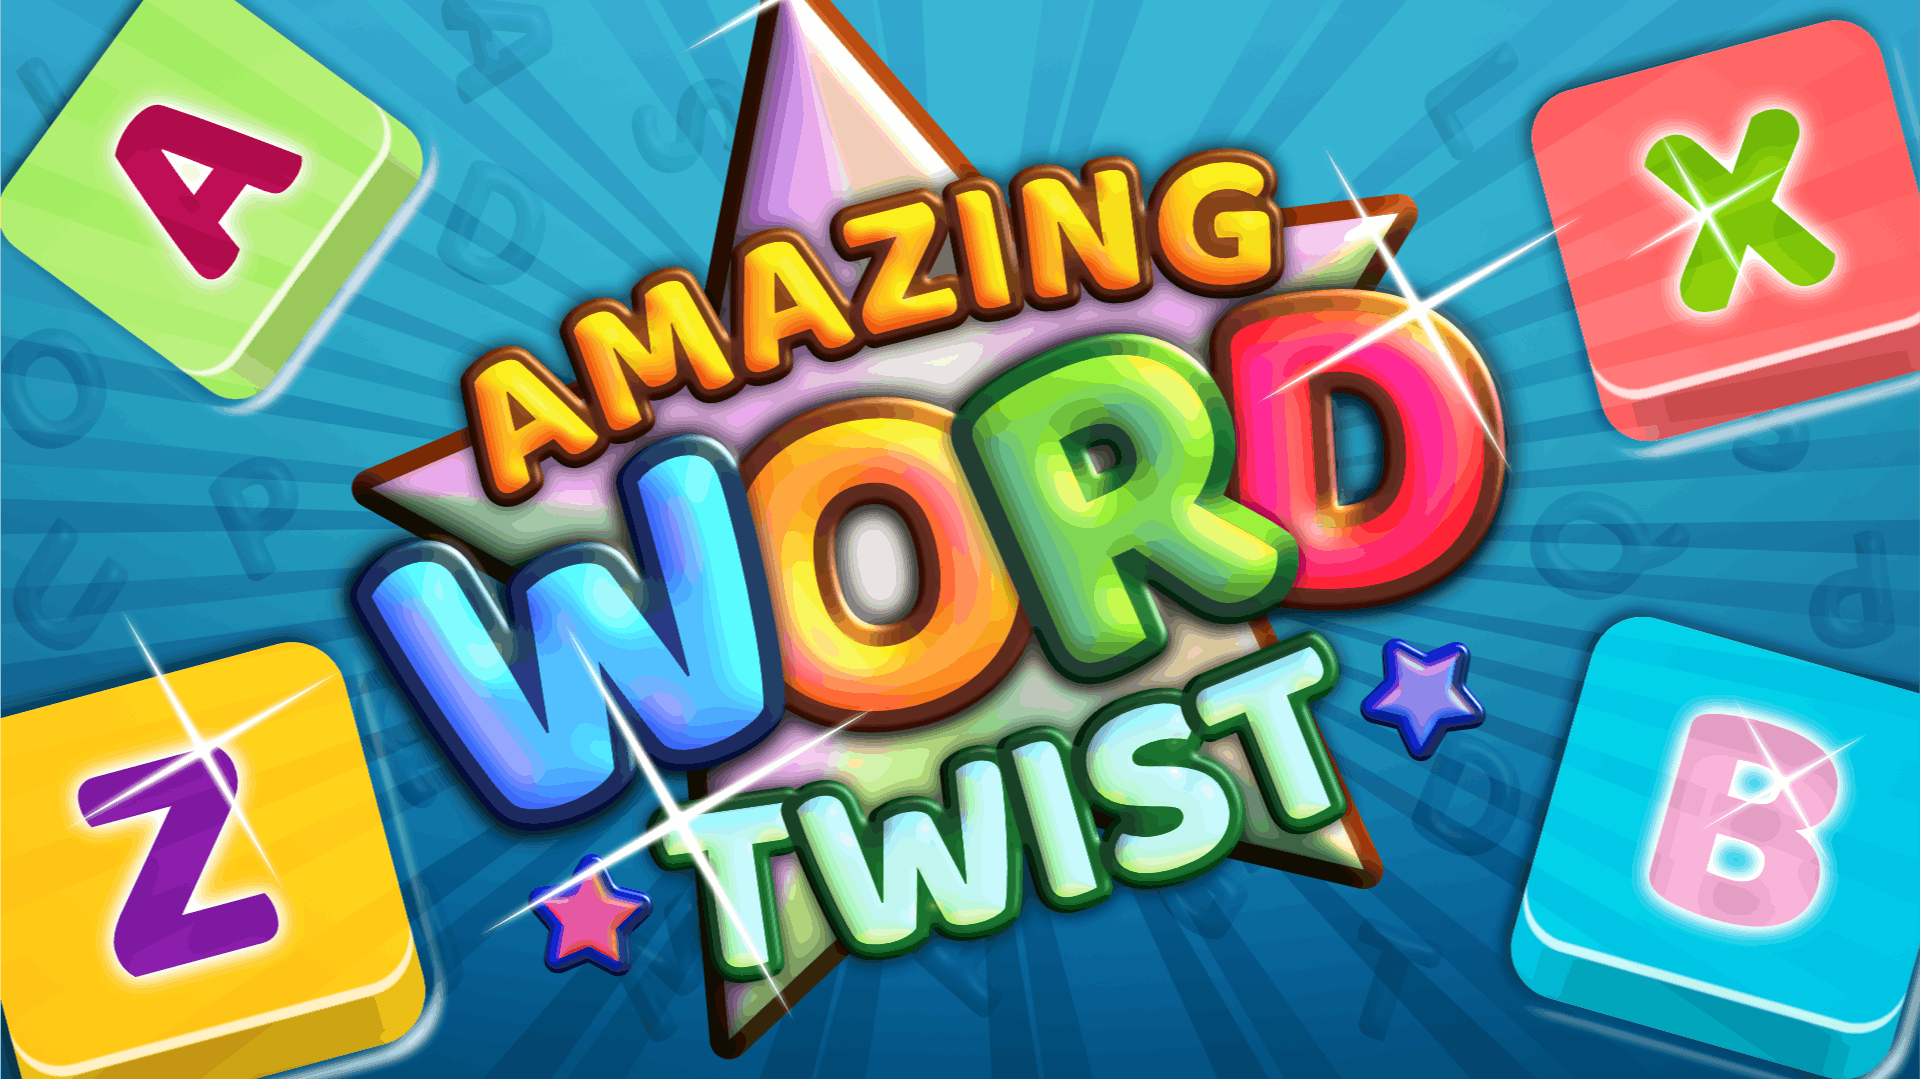 Word Games 🕹️ Play on CrazyGames